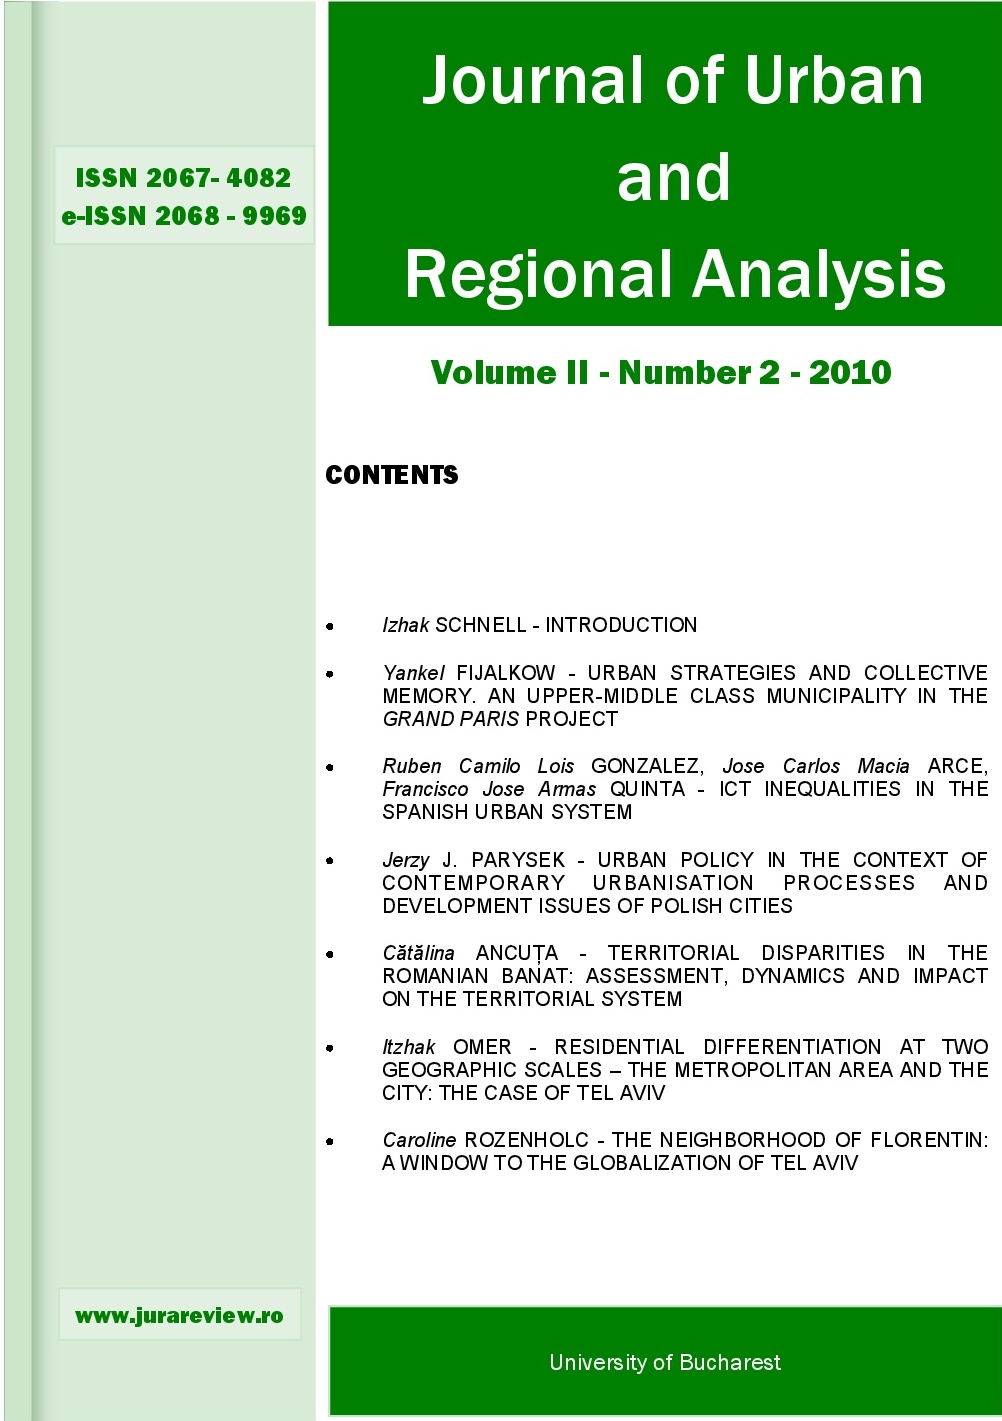 TERRITORIAL DISPARITIES IN THE ROMANIAN BANAT: ASSESSMENT, DYNAMICS AND IMPACT ON THE TERRITORIAL SYSTEM